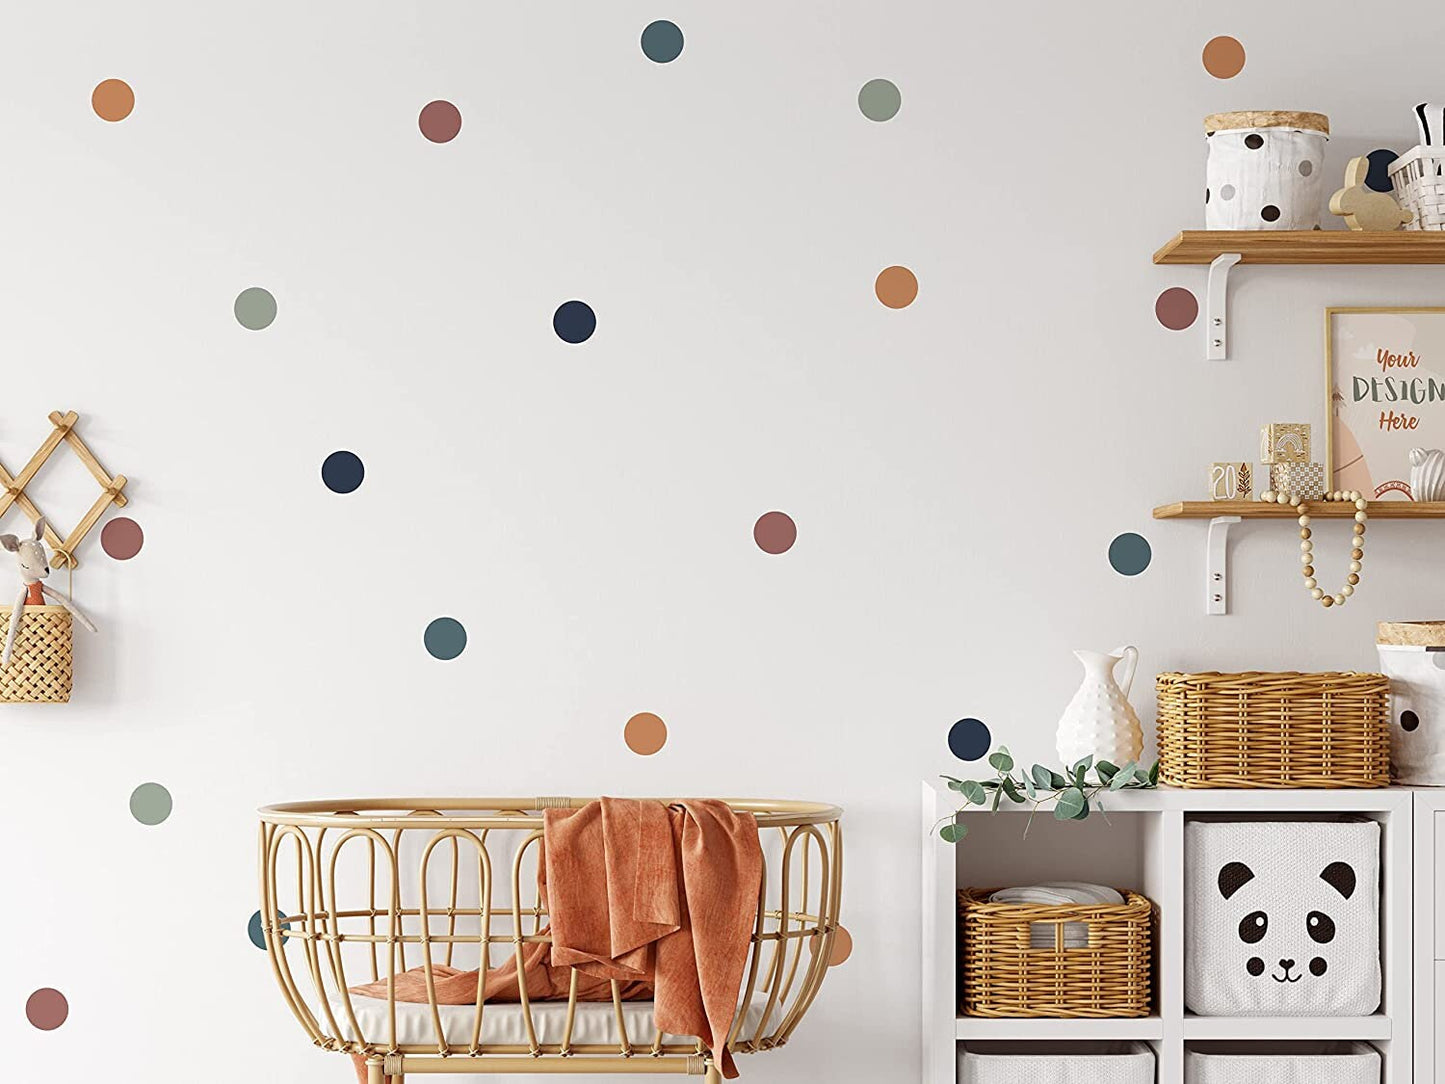 Round Circle Boho Polka Dot Wall Stickers | Boho Chic Wall Decals Decor Removable Spots For Nursery Kids Playroom